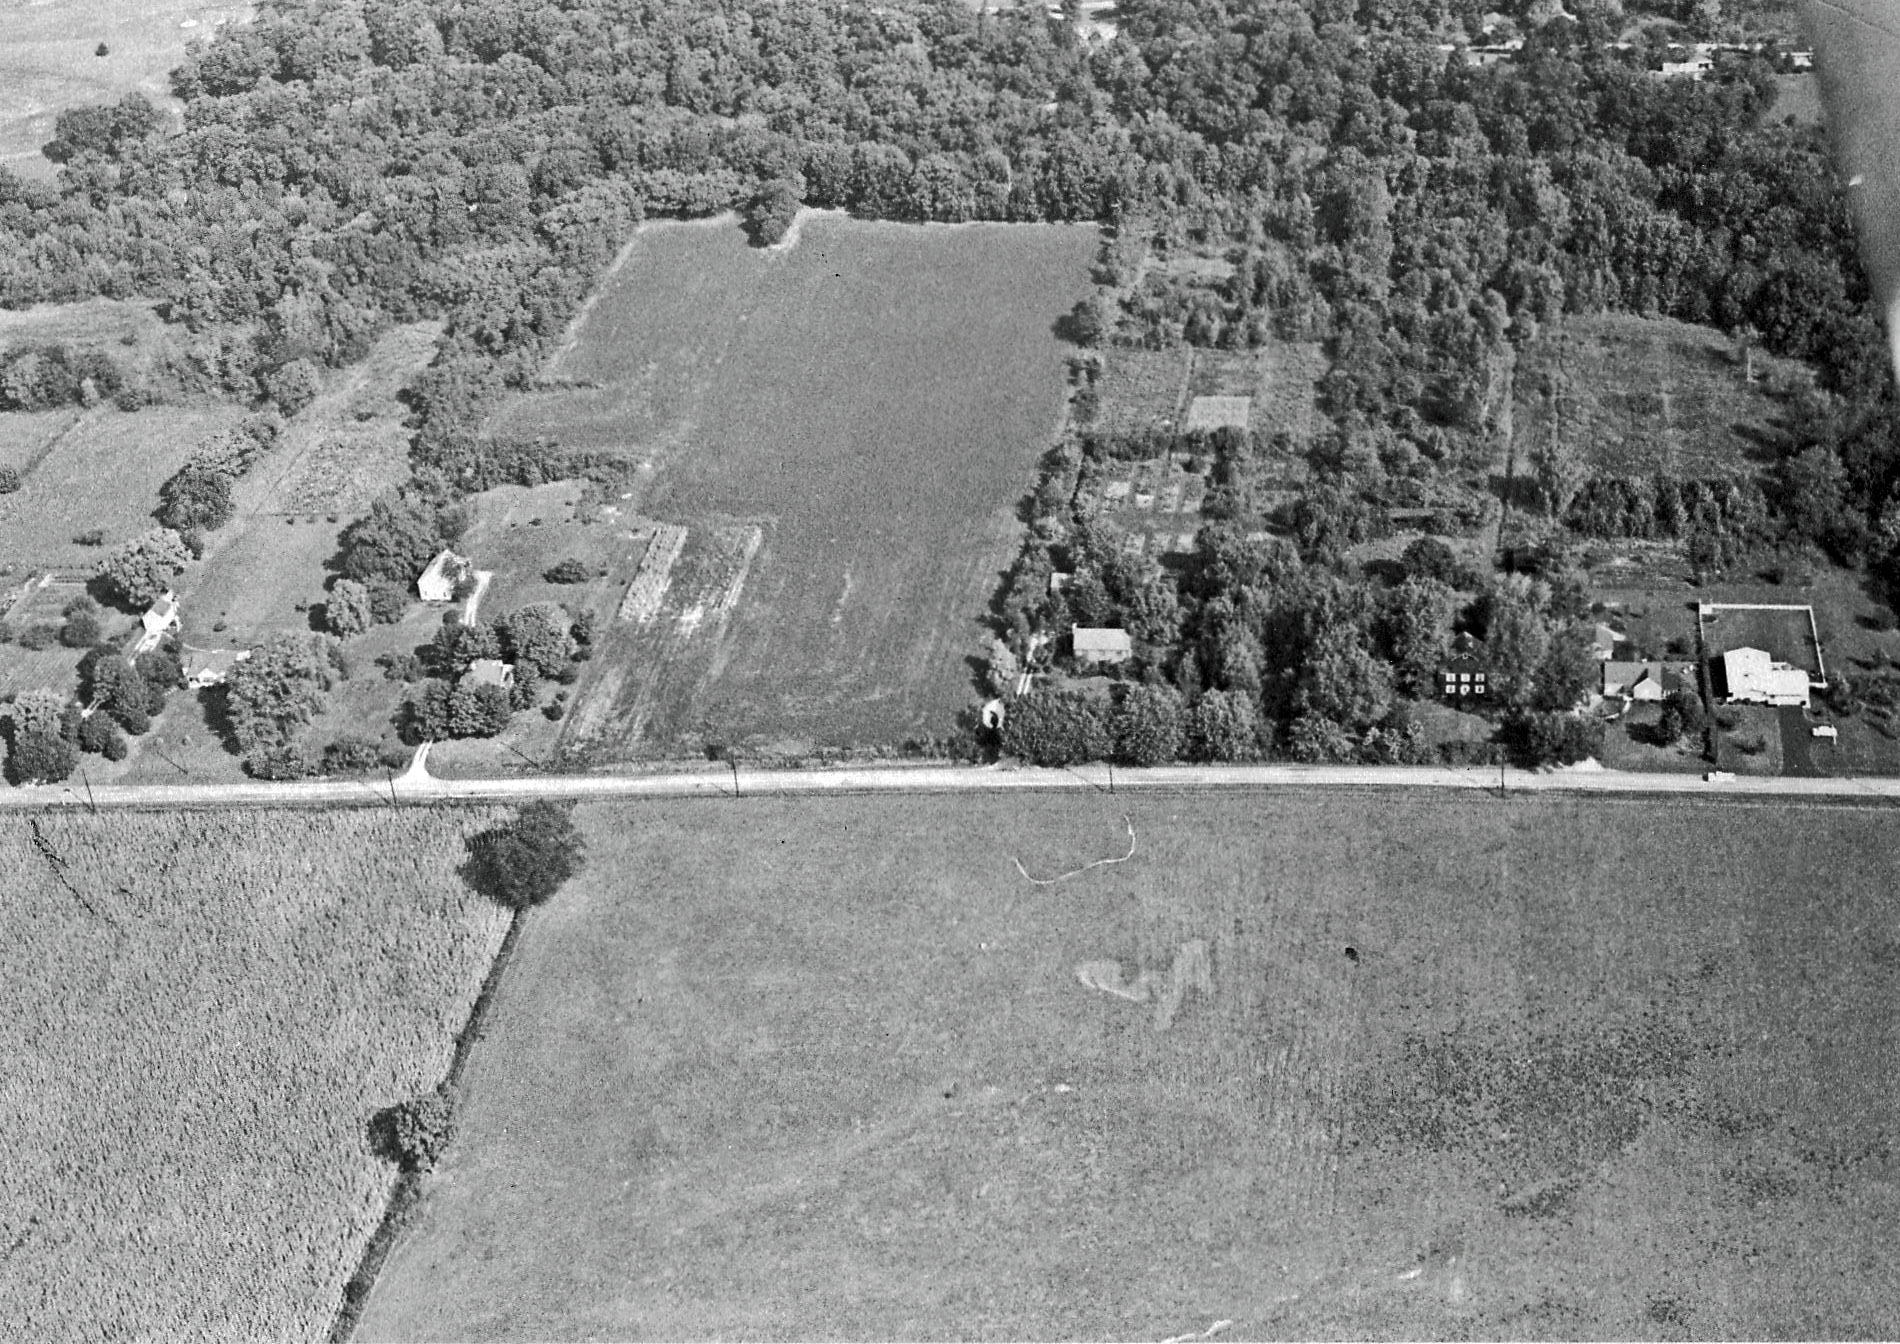 an aerial po showing the site of a rural area and a large field